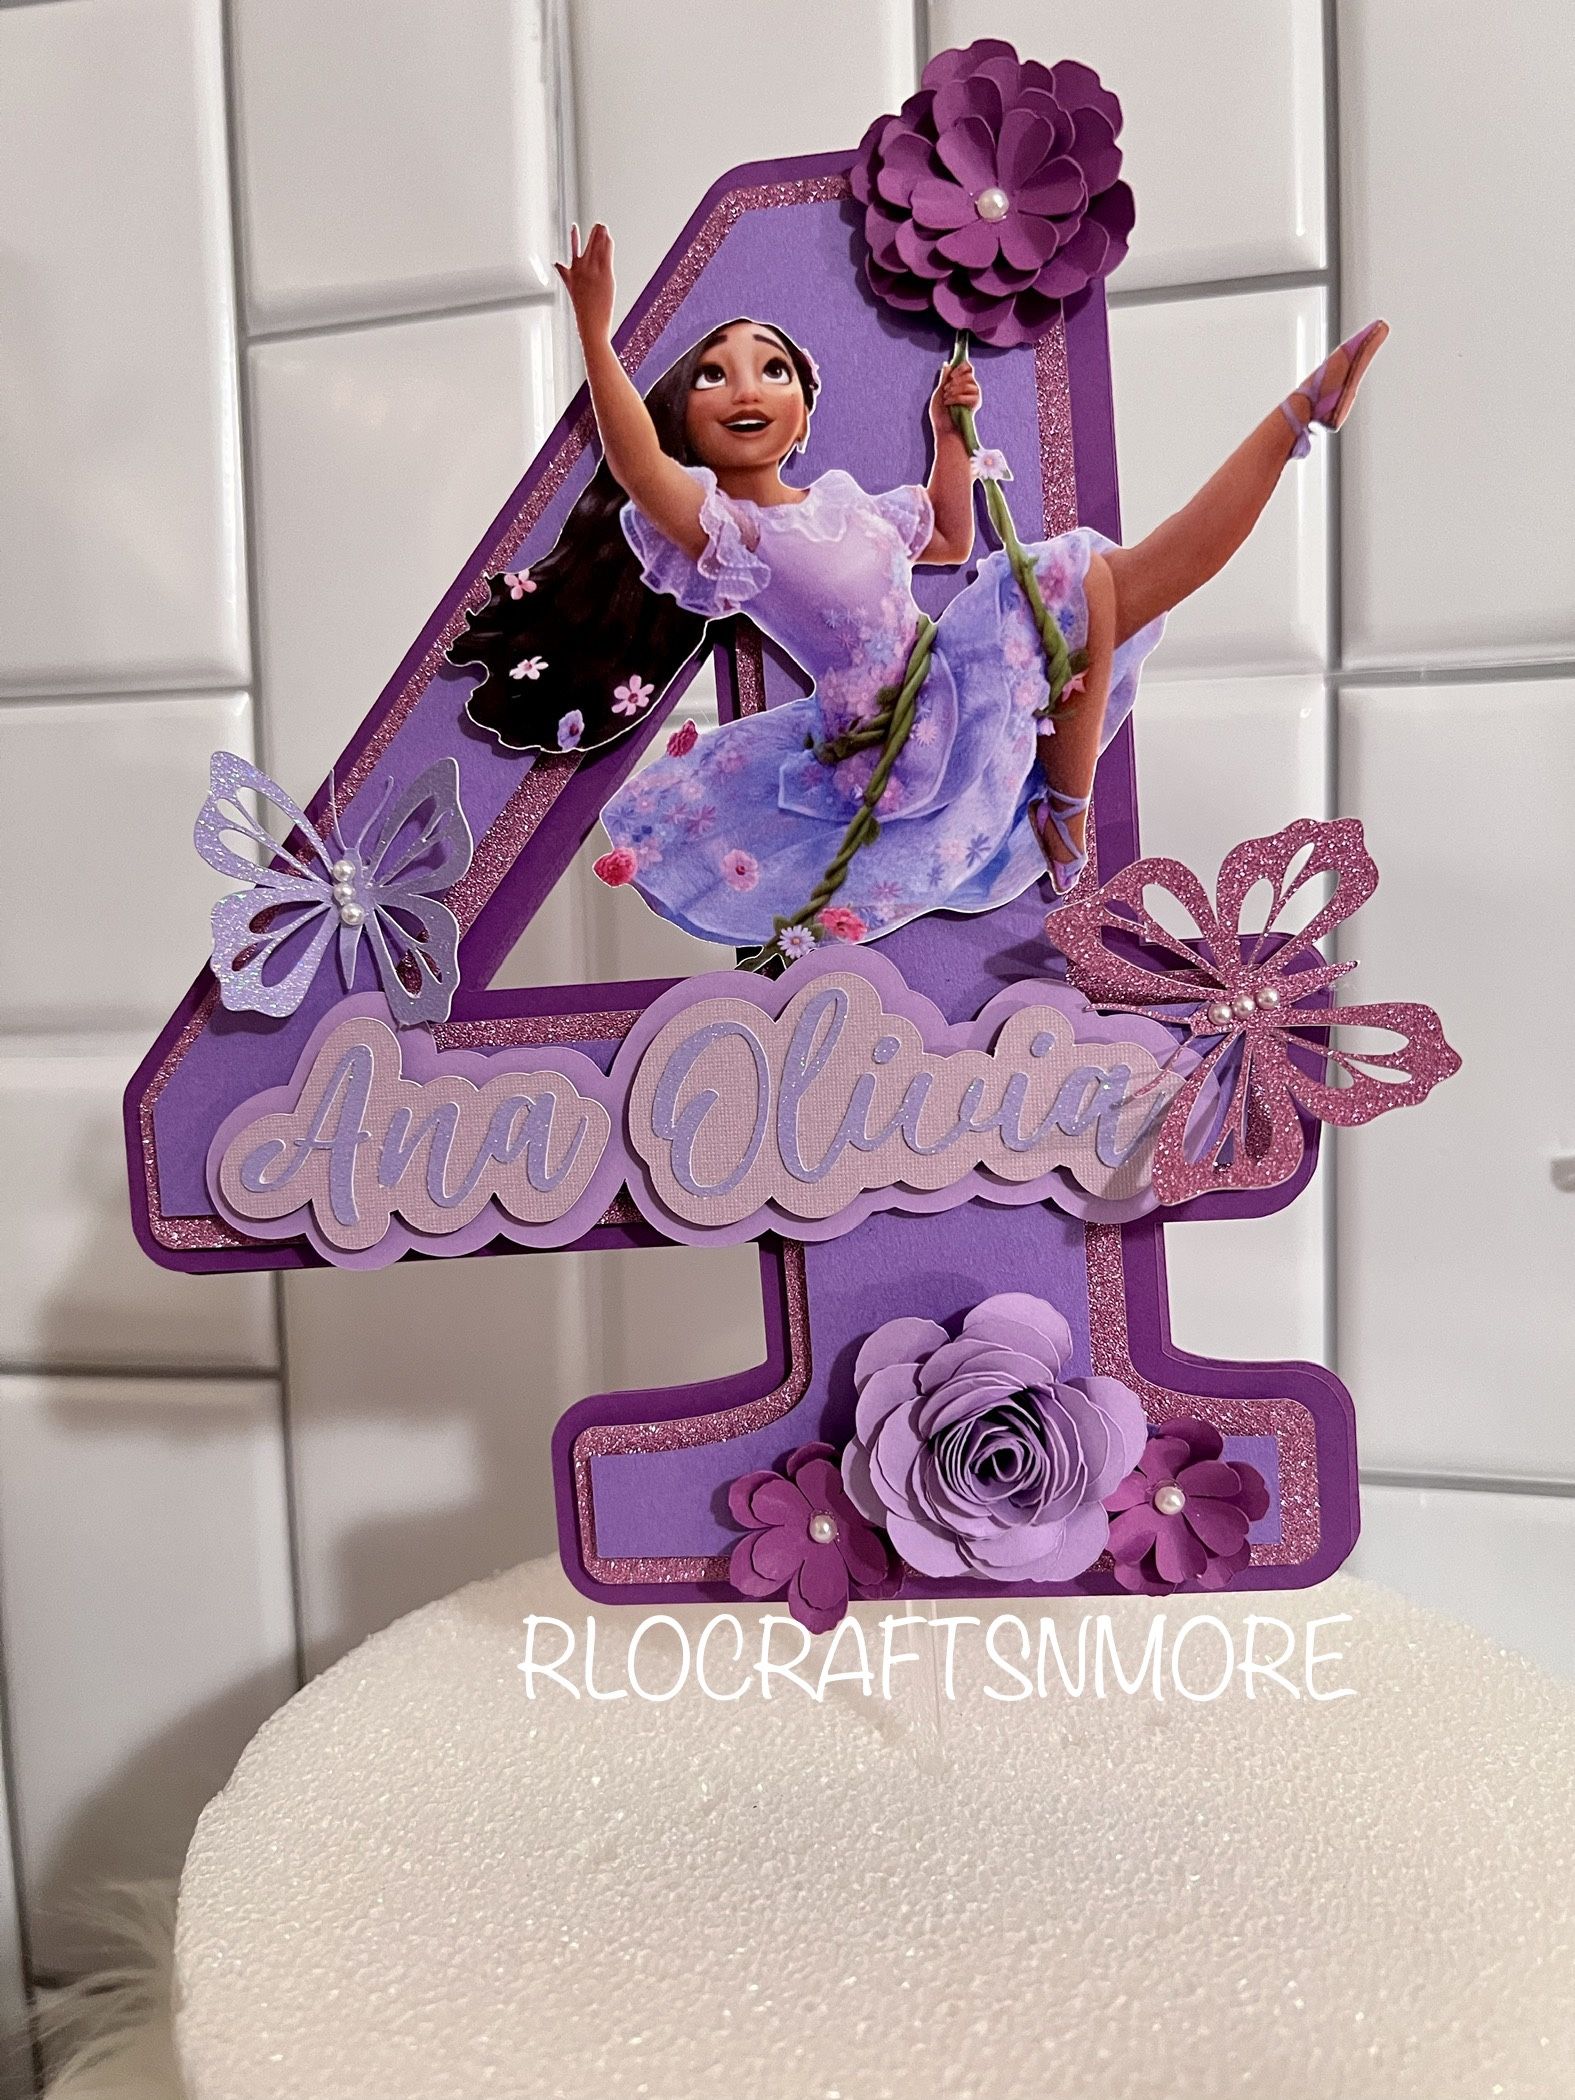 Personalized Cake Topper 